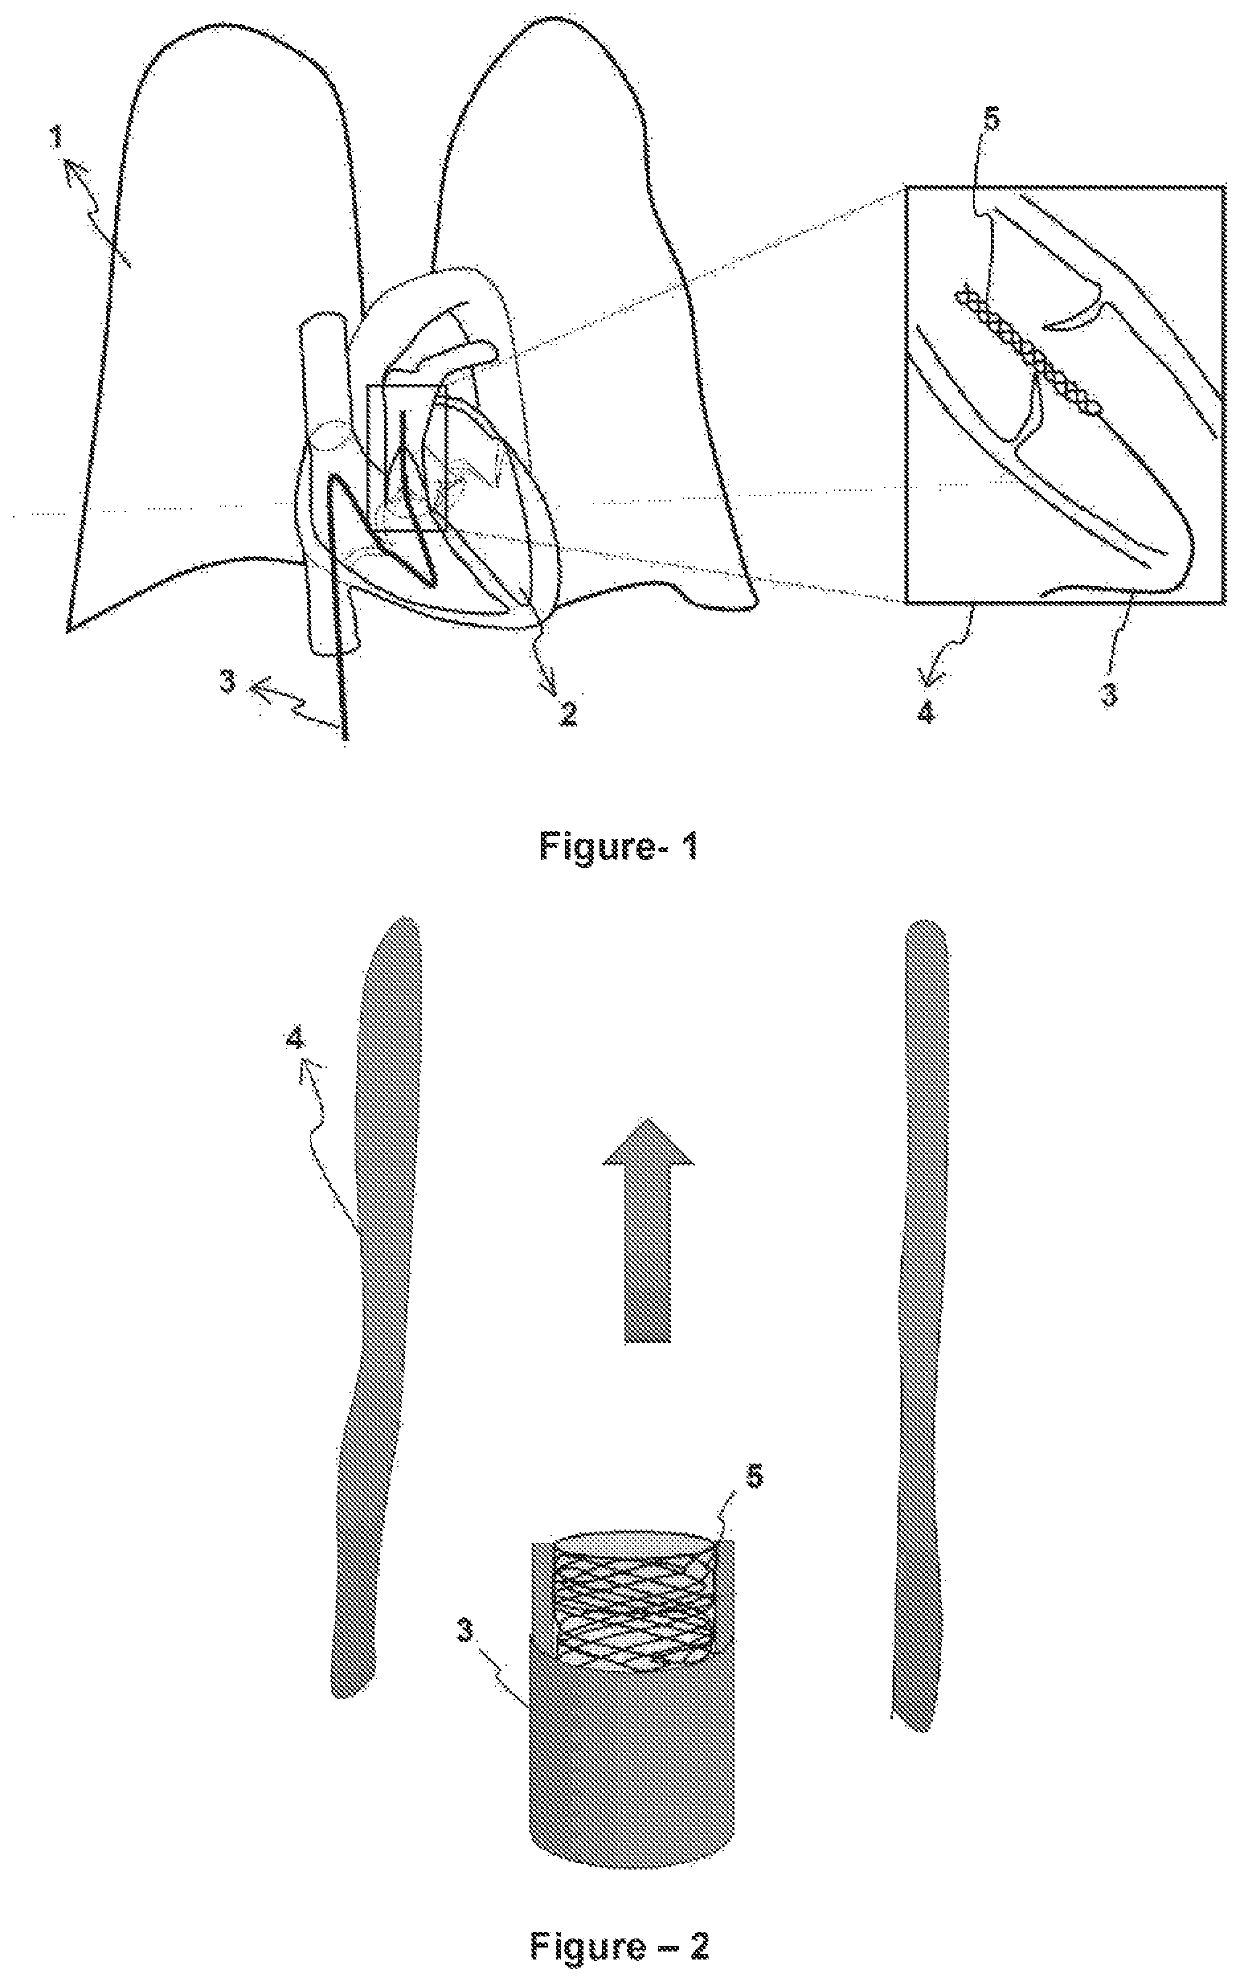 Medical device being inserted intravascularly and providing protection against pulmonary hypertension risk in treatment of patients with heart defect